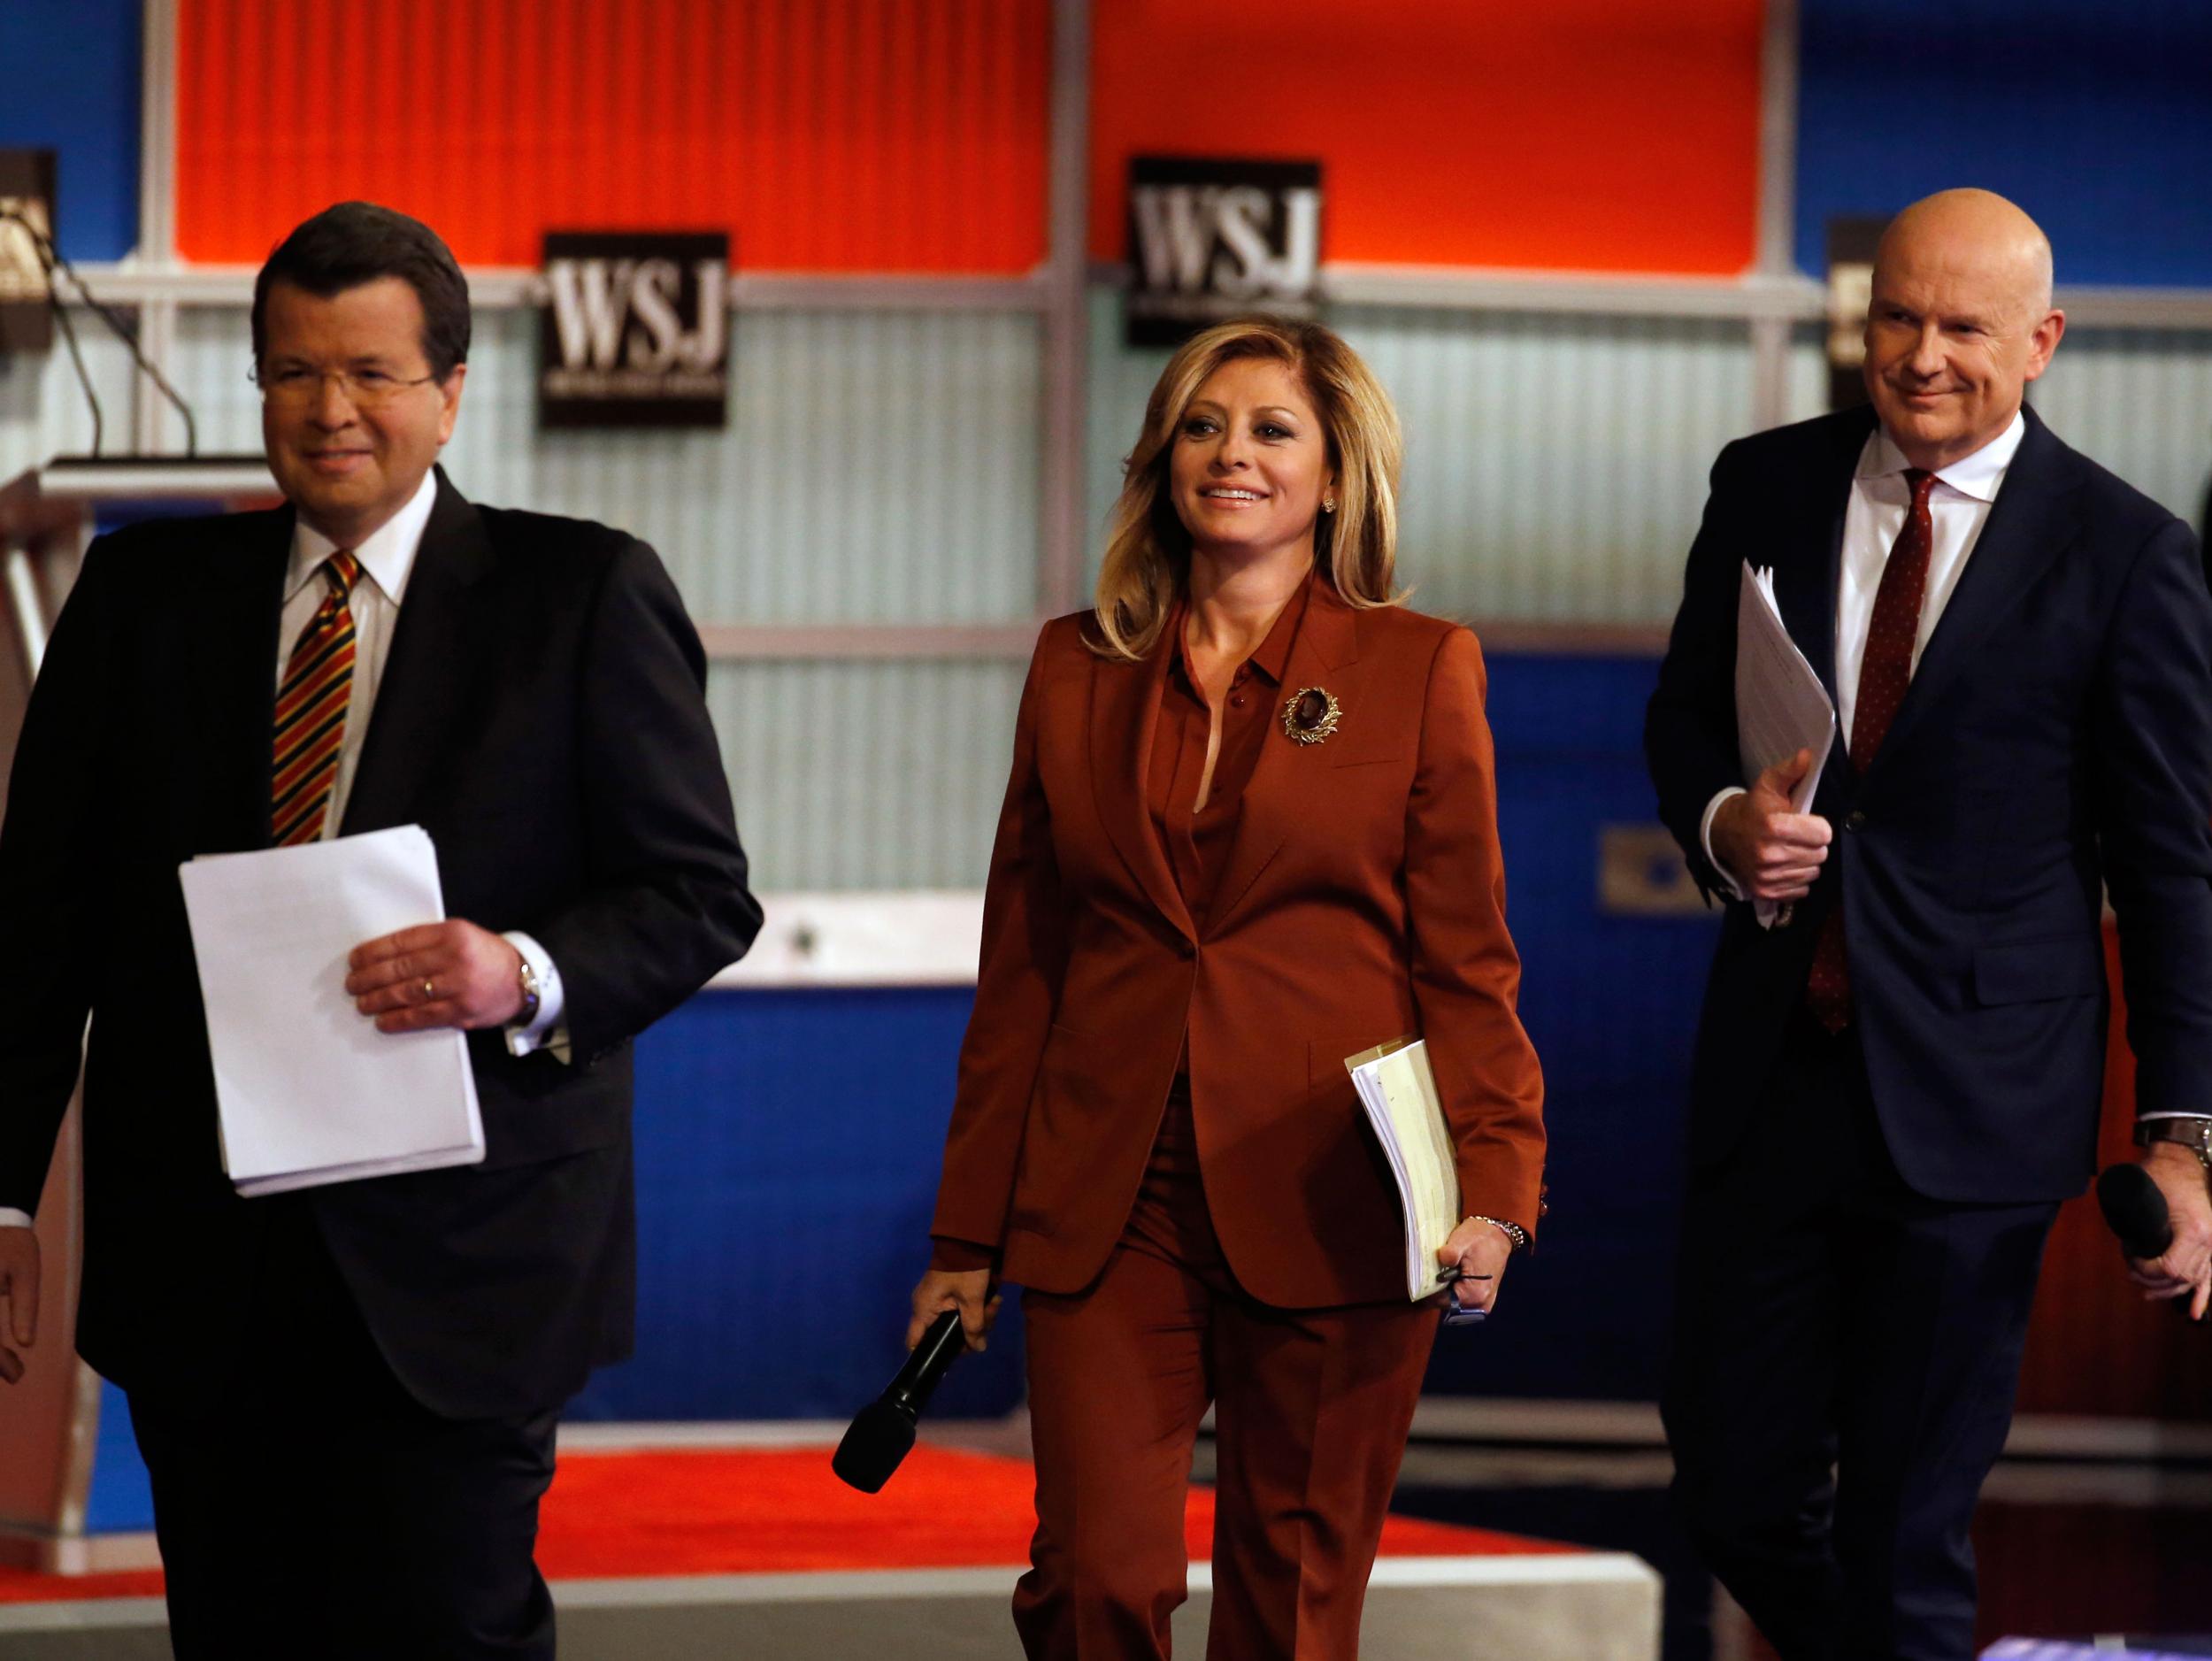 Moderators Neil Cavuto, left, Maria Bartiromo and Gerard Baker arrive on stage before the Republican presidential debate